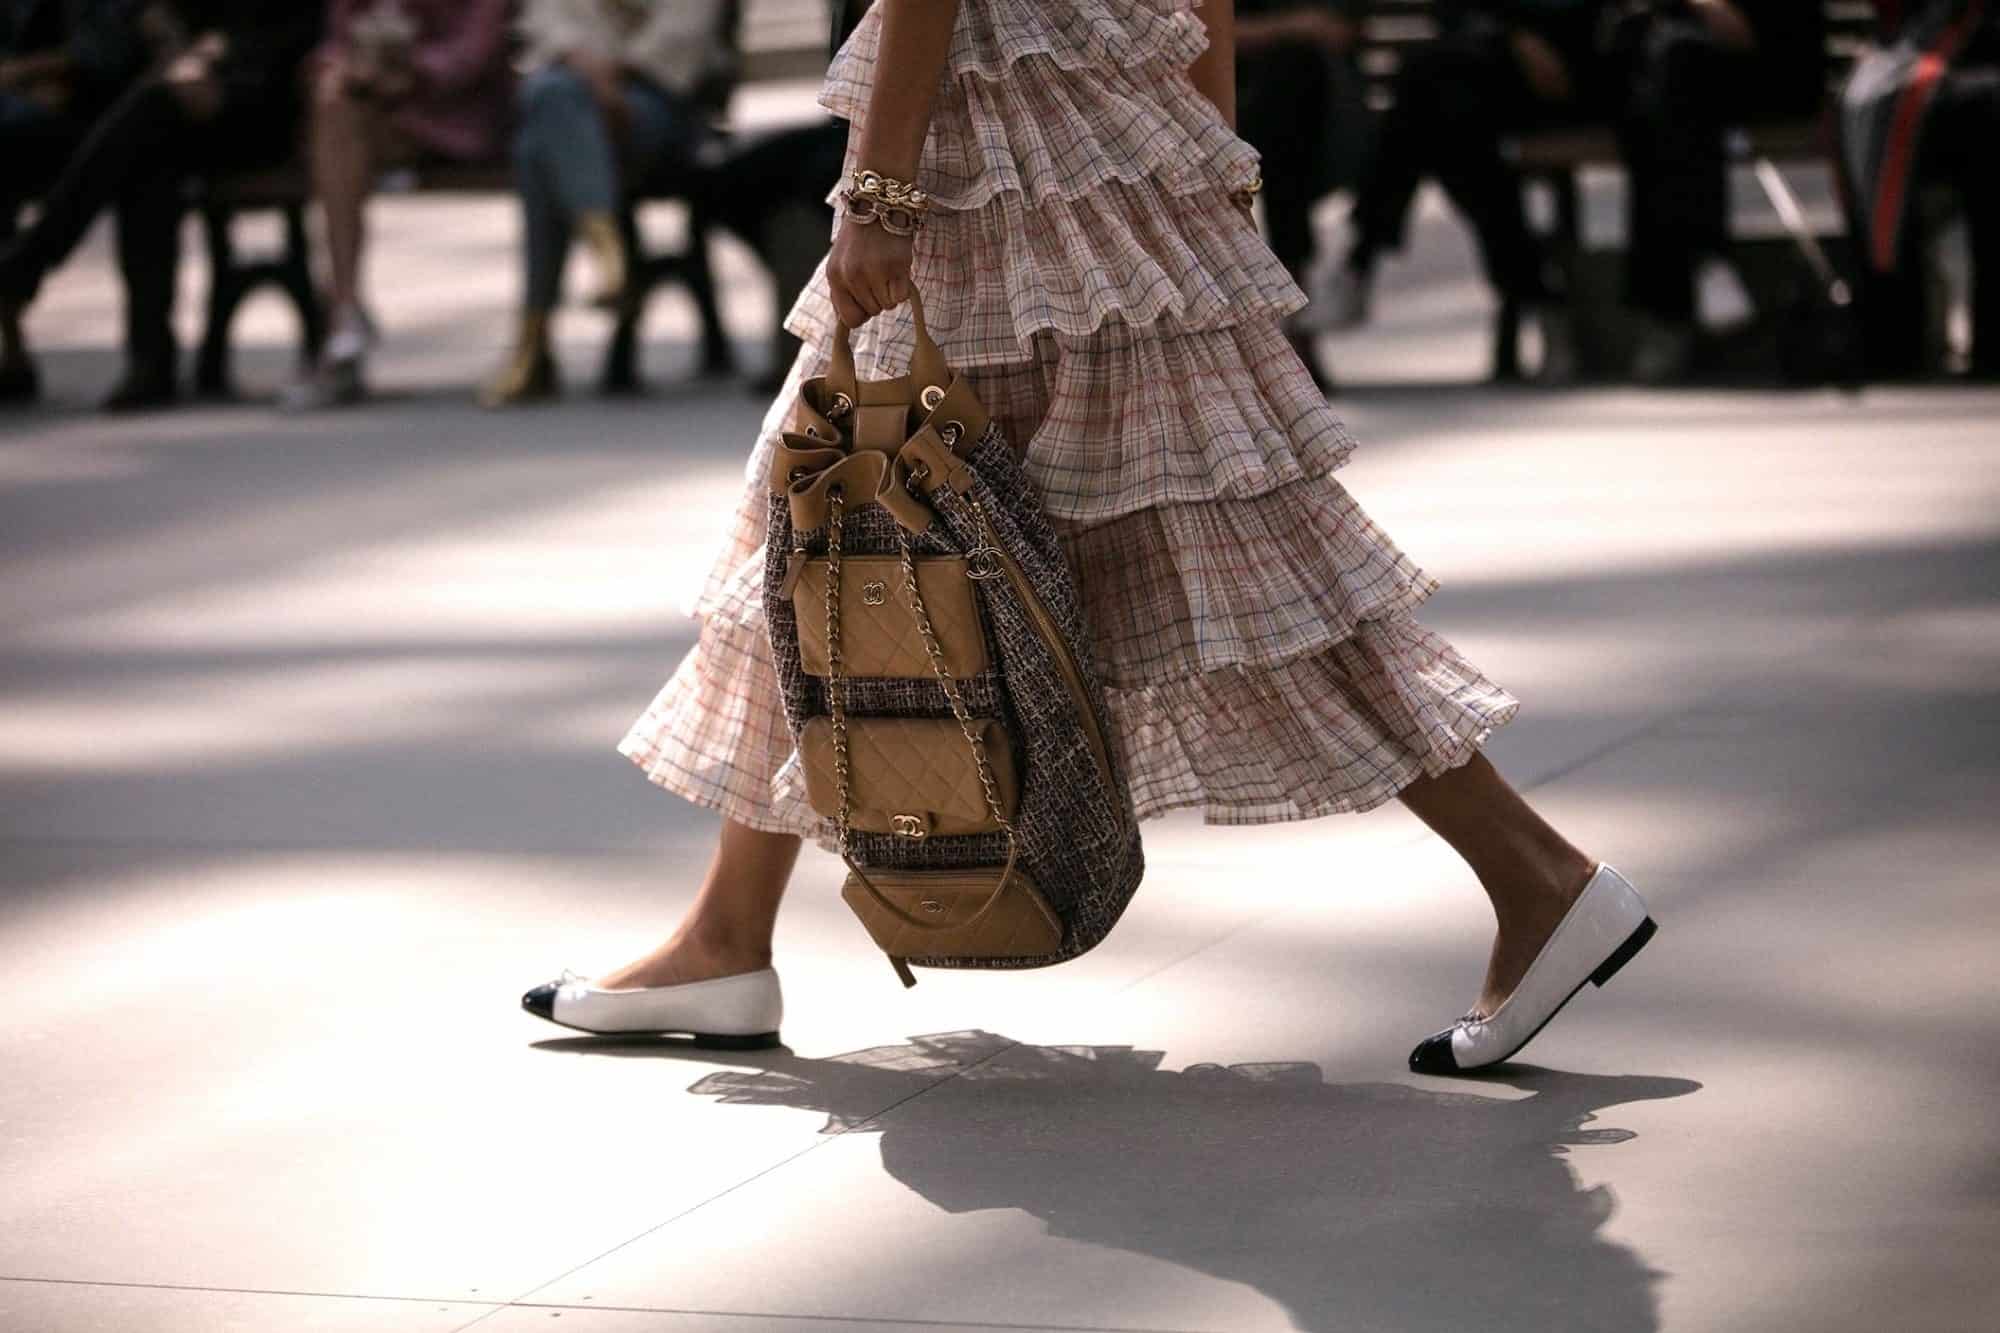 How to shop in Paris? We have some tips here, like where to buy the right outfit like this frilly skirt paired with a rucksack and pumps.